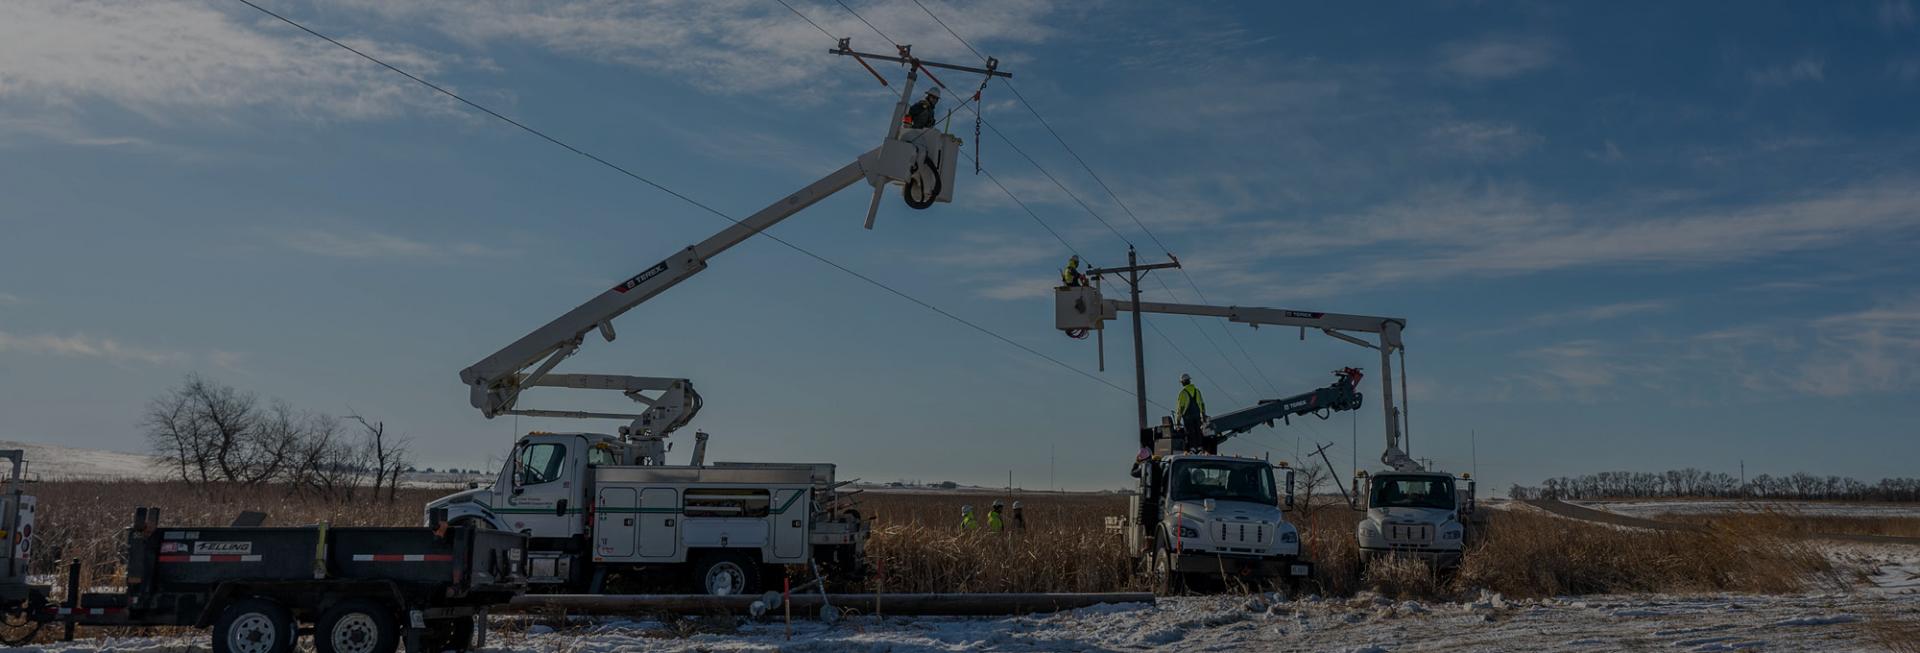 Picture of bucket trucks and lineworkers working to restore power